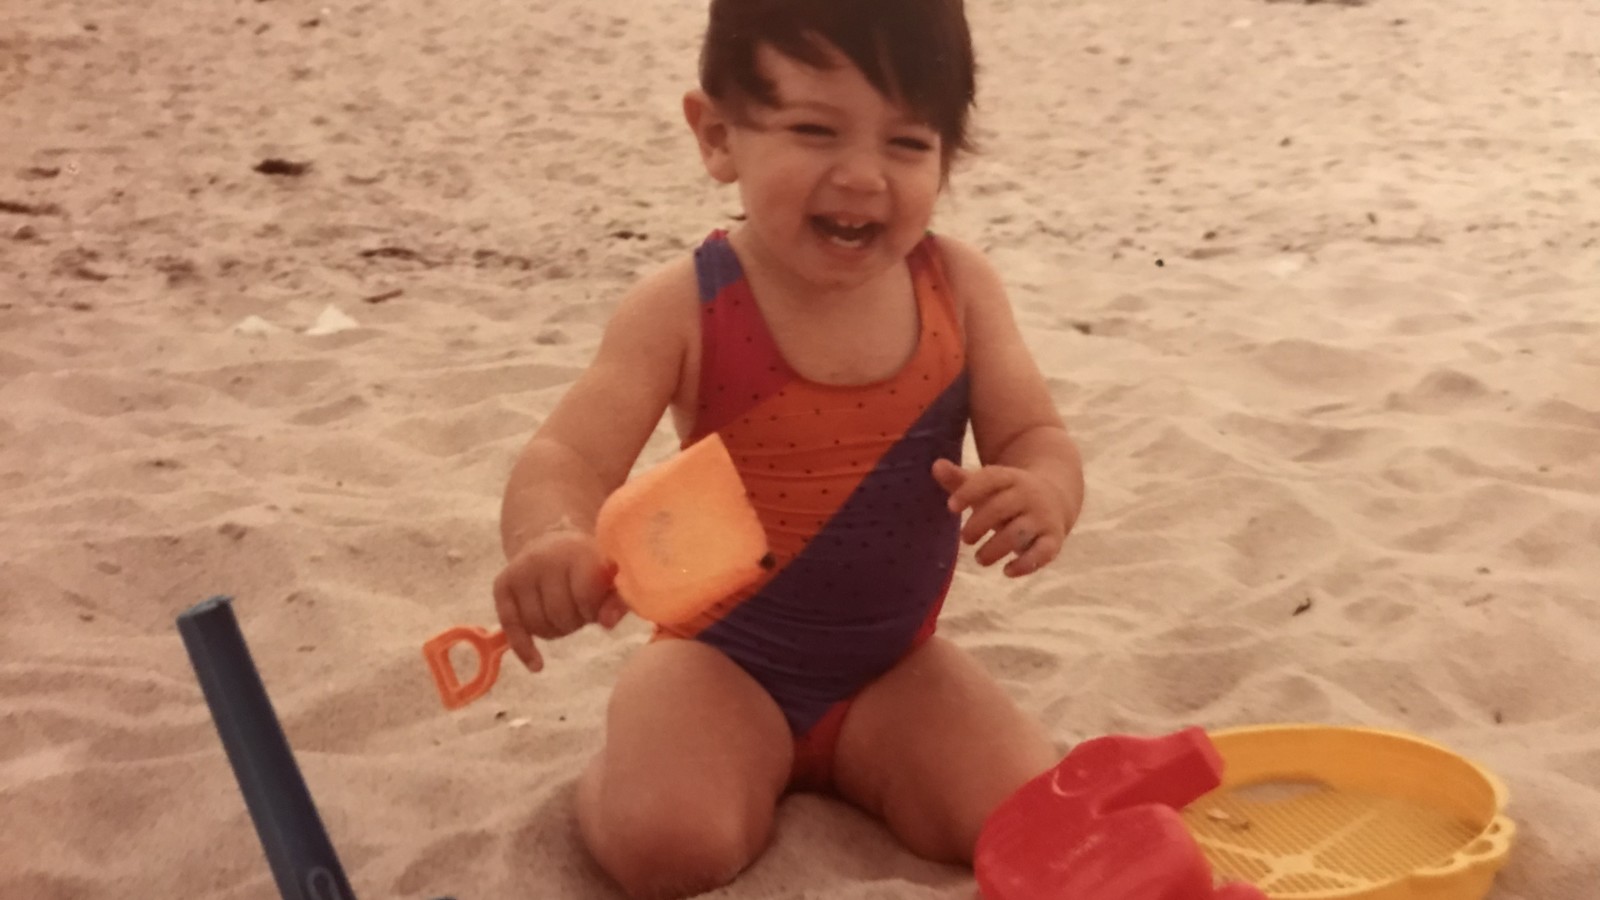 Xian on the beach with a shovel giggling age 1